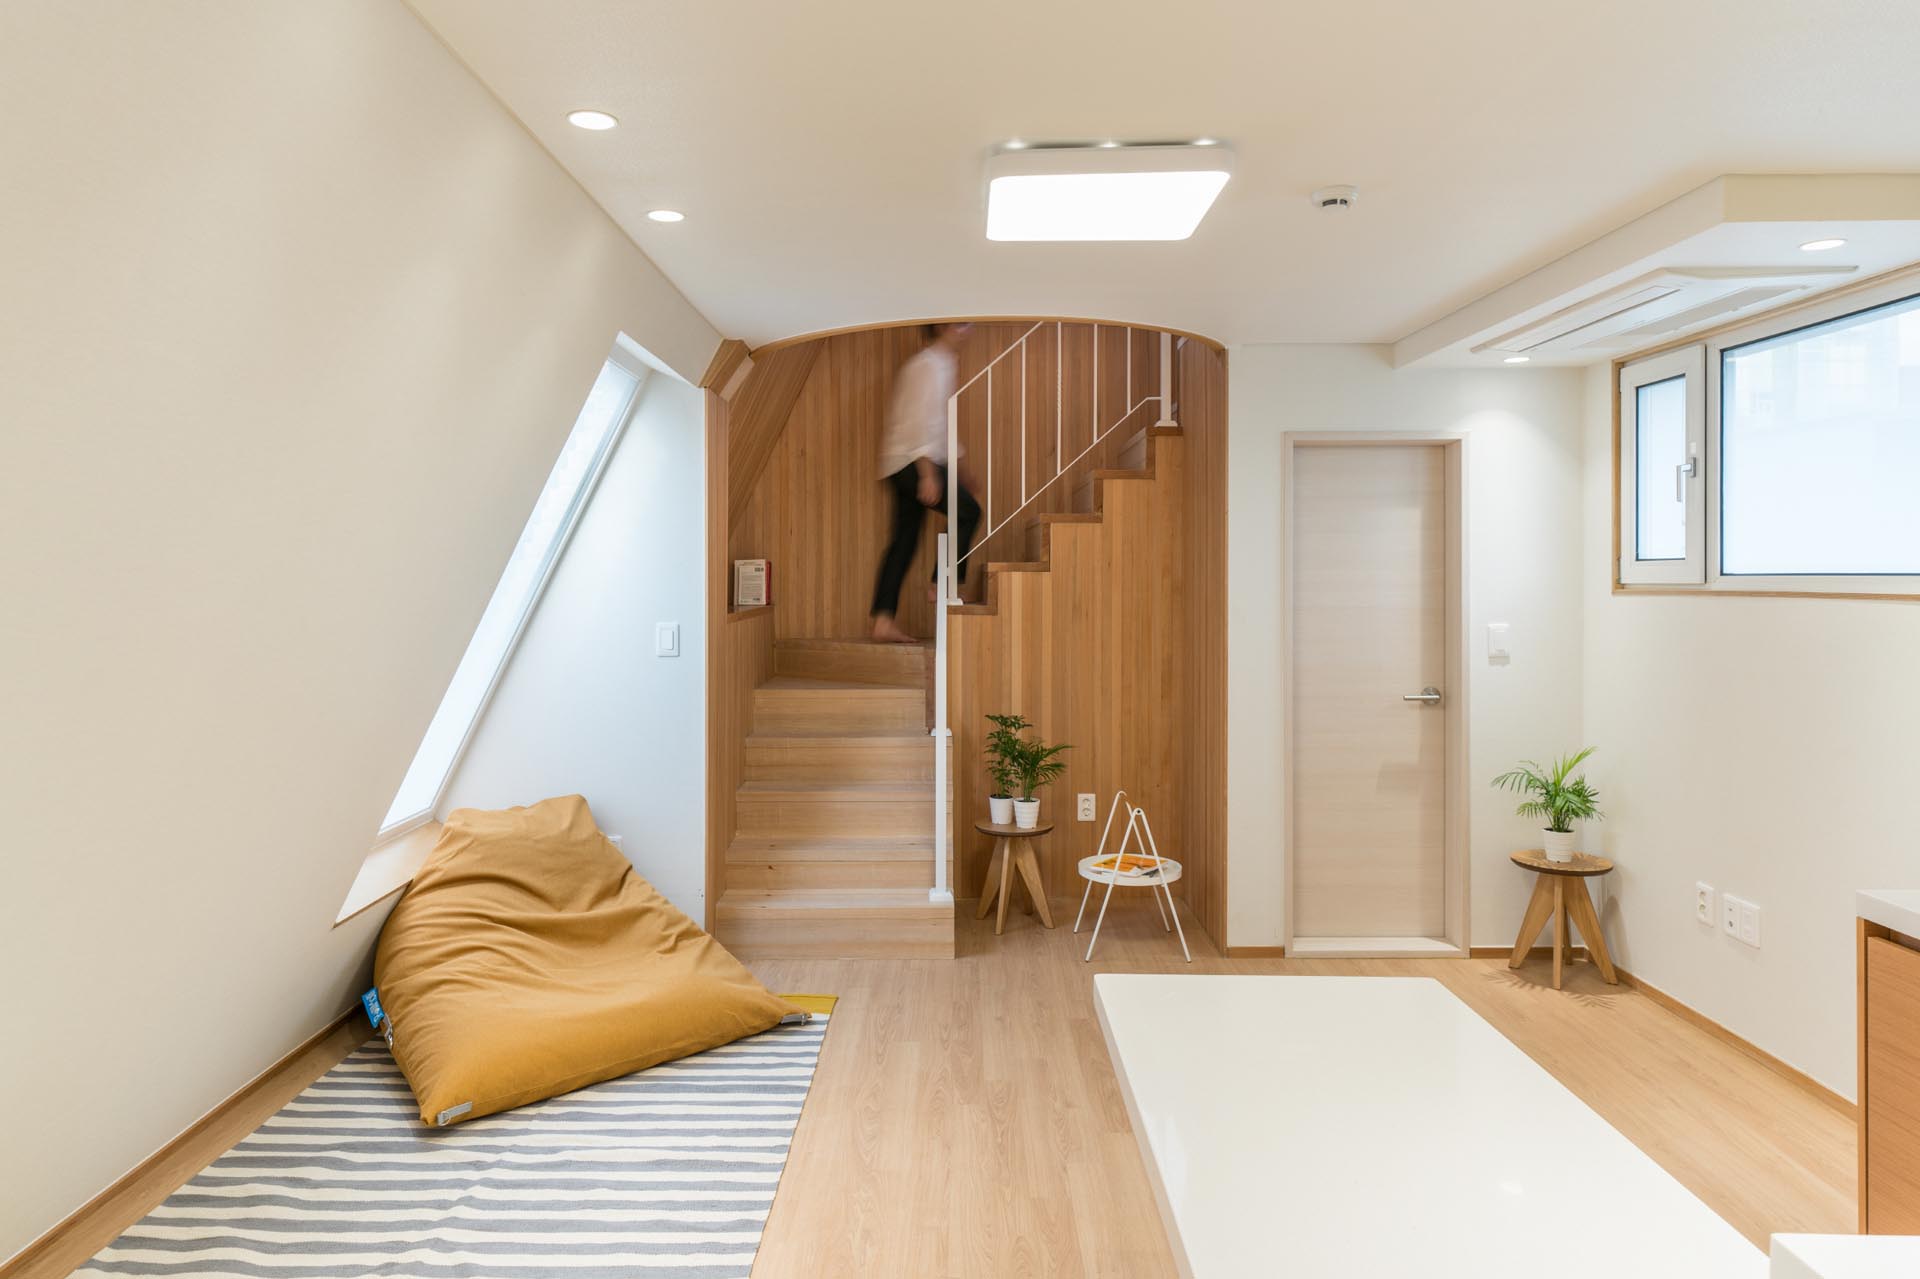 A modern apartment with a wood-lined stairwell.